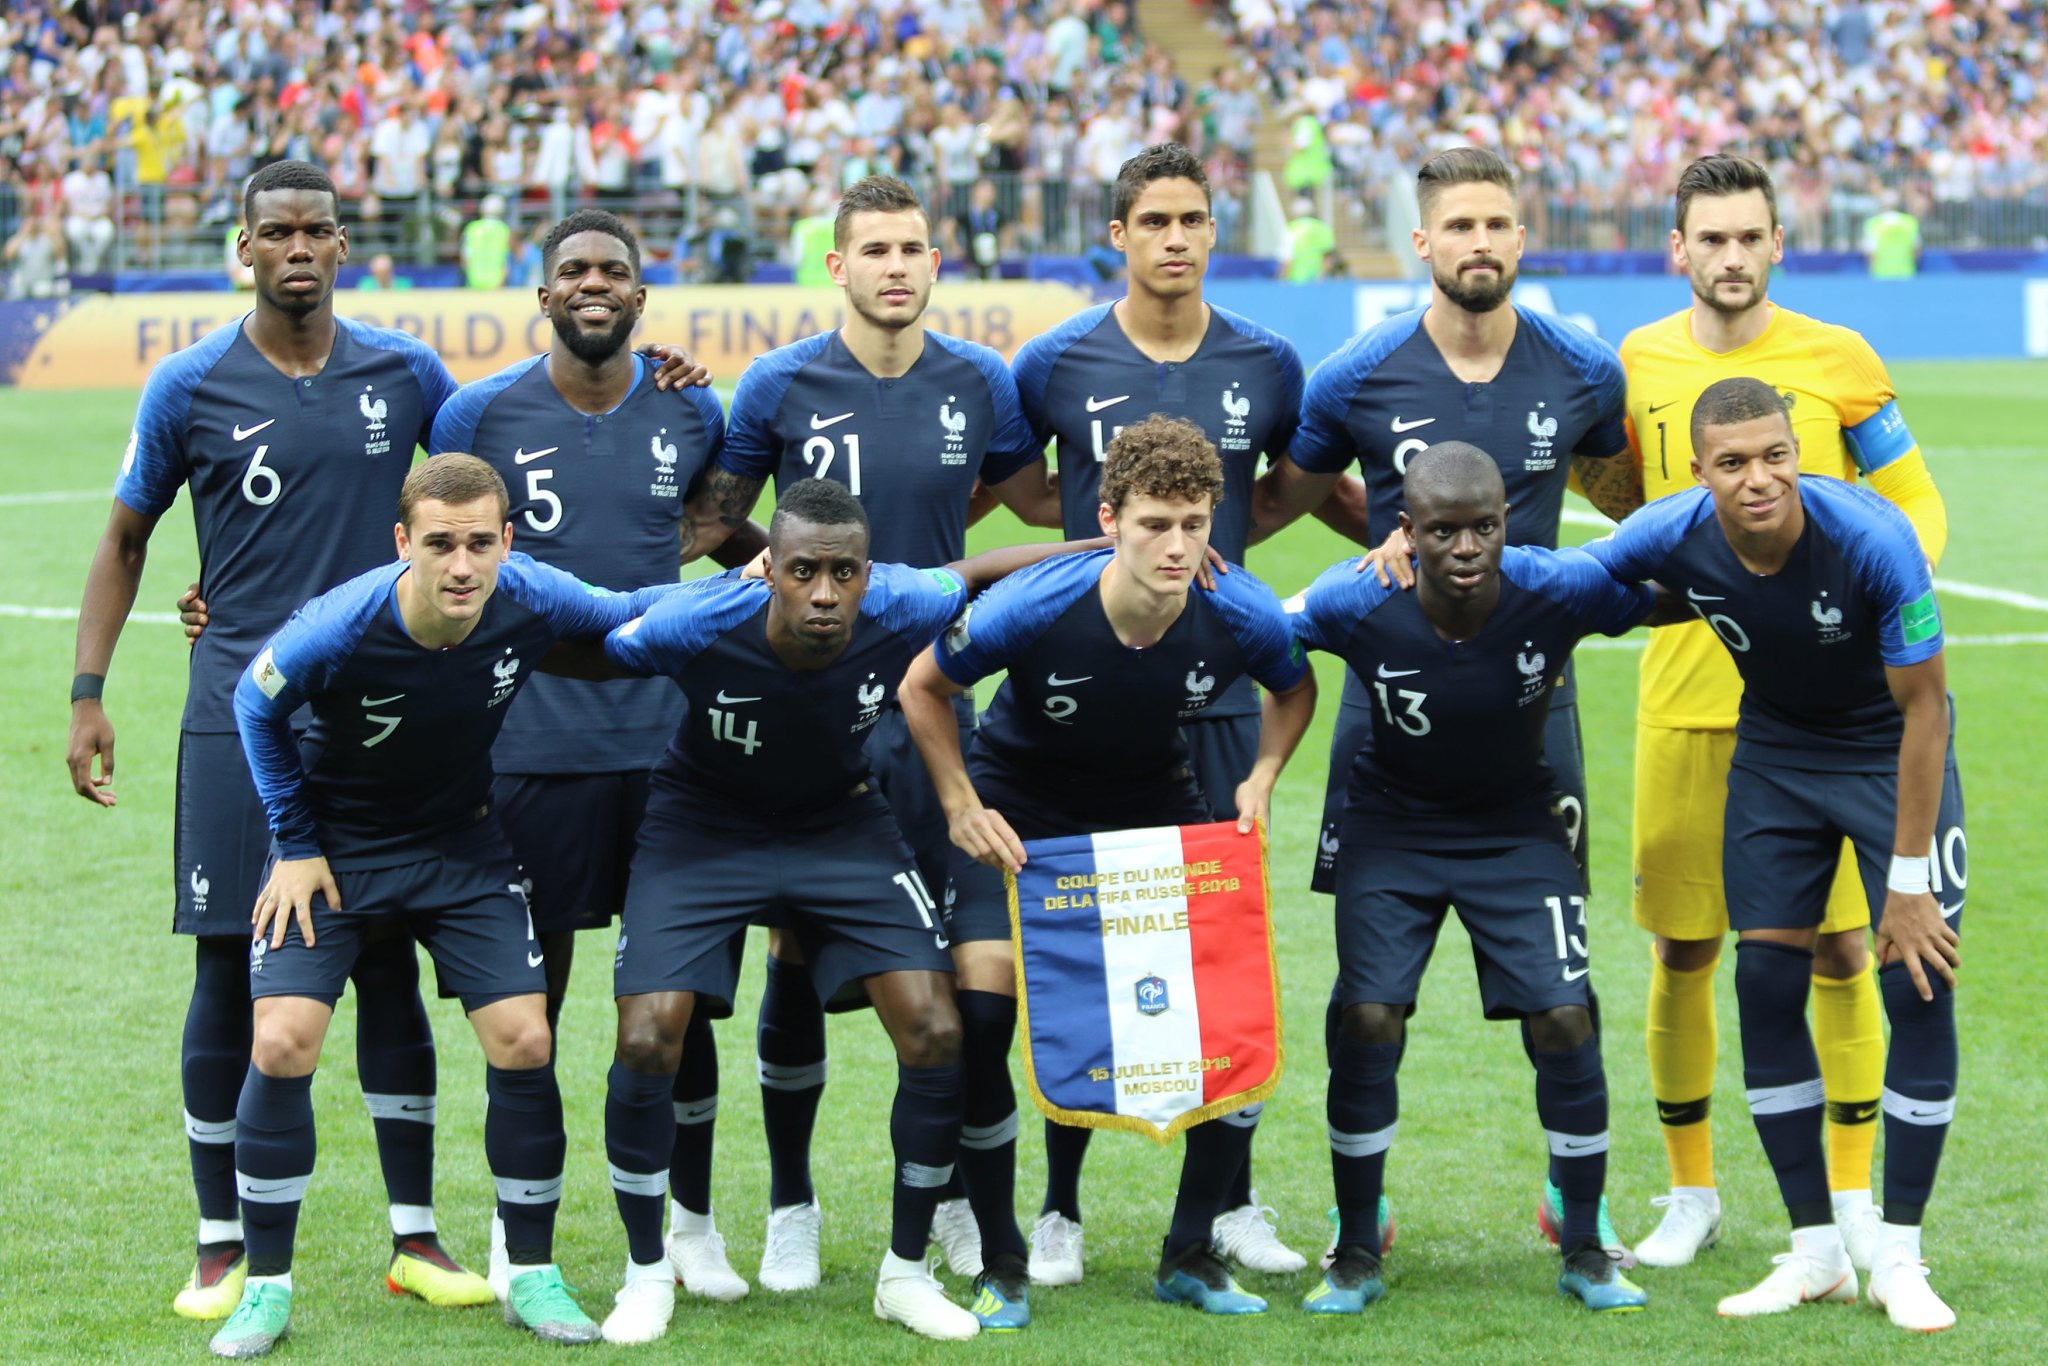 Lucas Hernandez (#21) was part of the French team that won the World Cup after a 4-2 win against Croatia at Luzhniki stadium in Moscow, Russia, July 15, 2018. /CFP